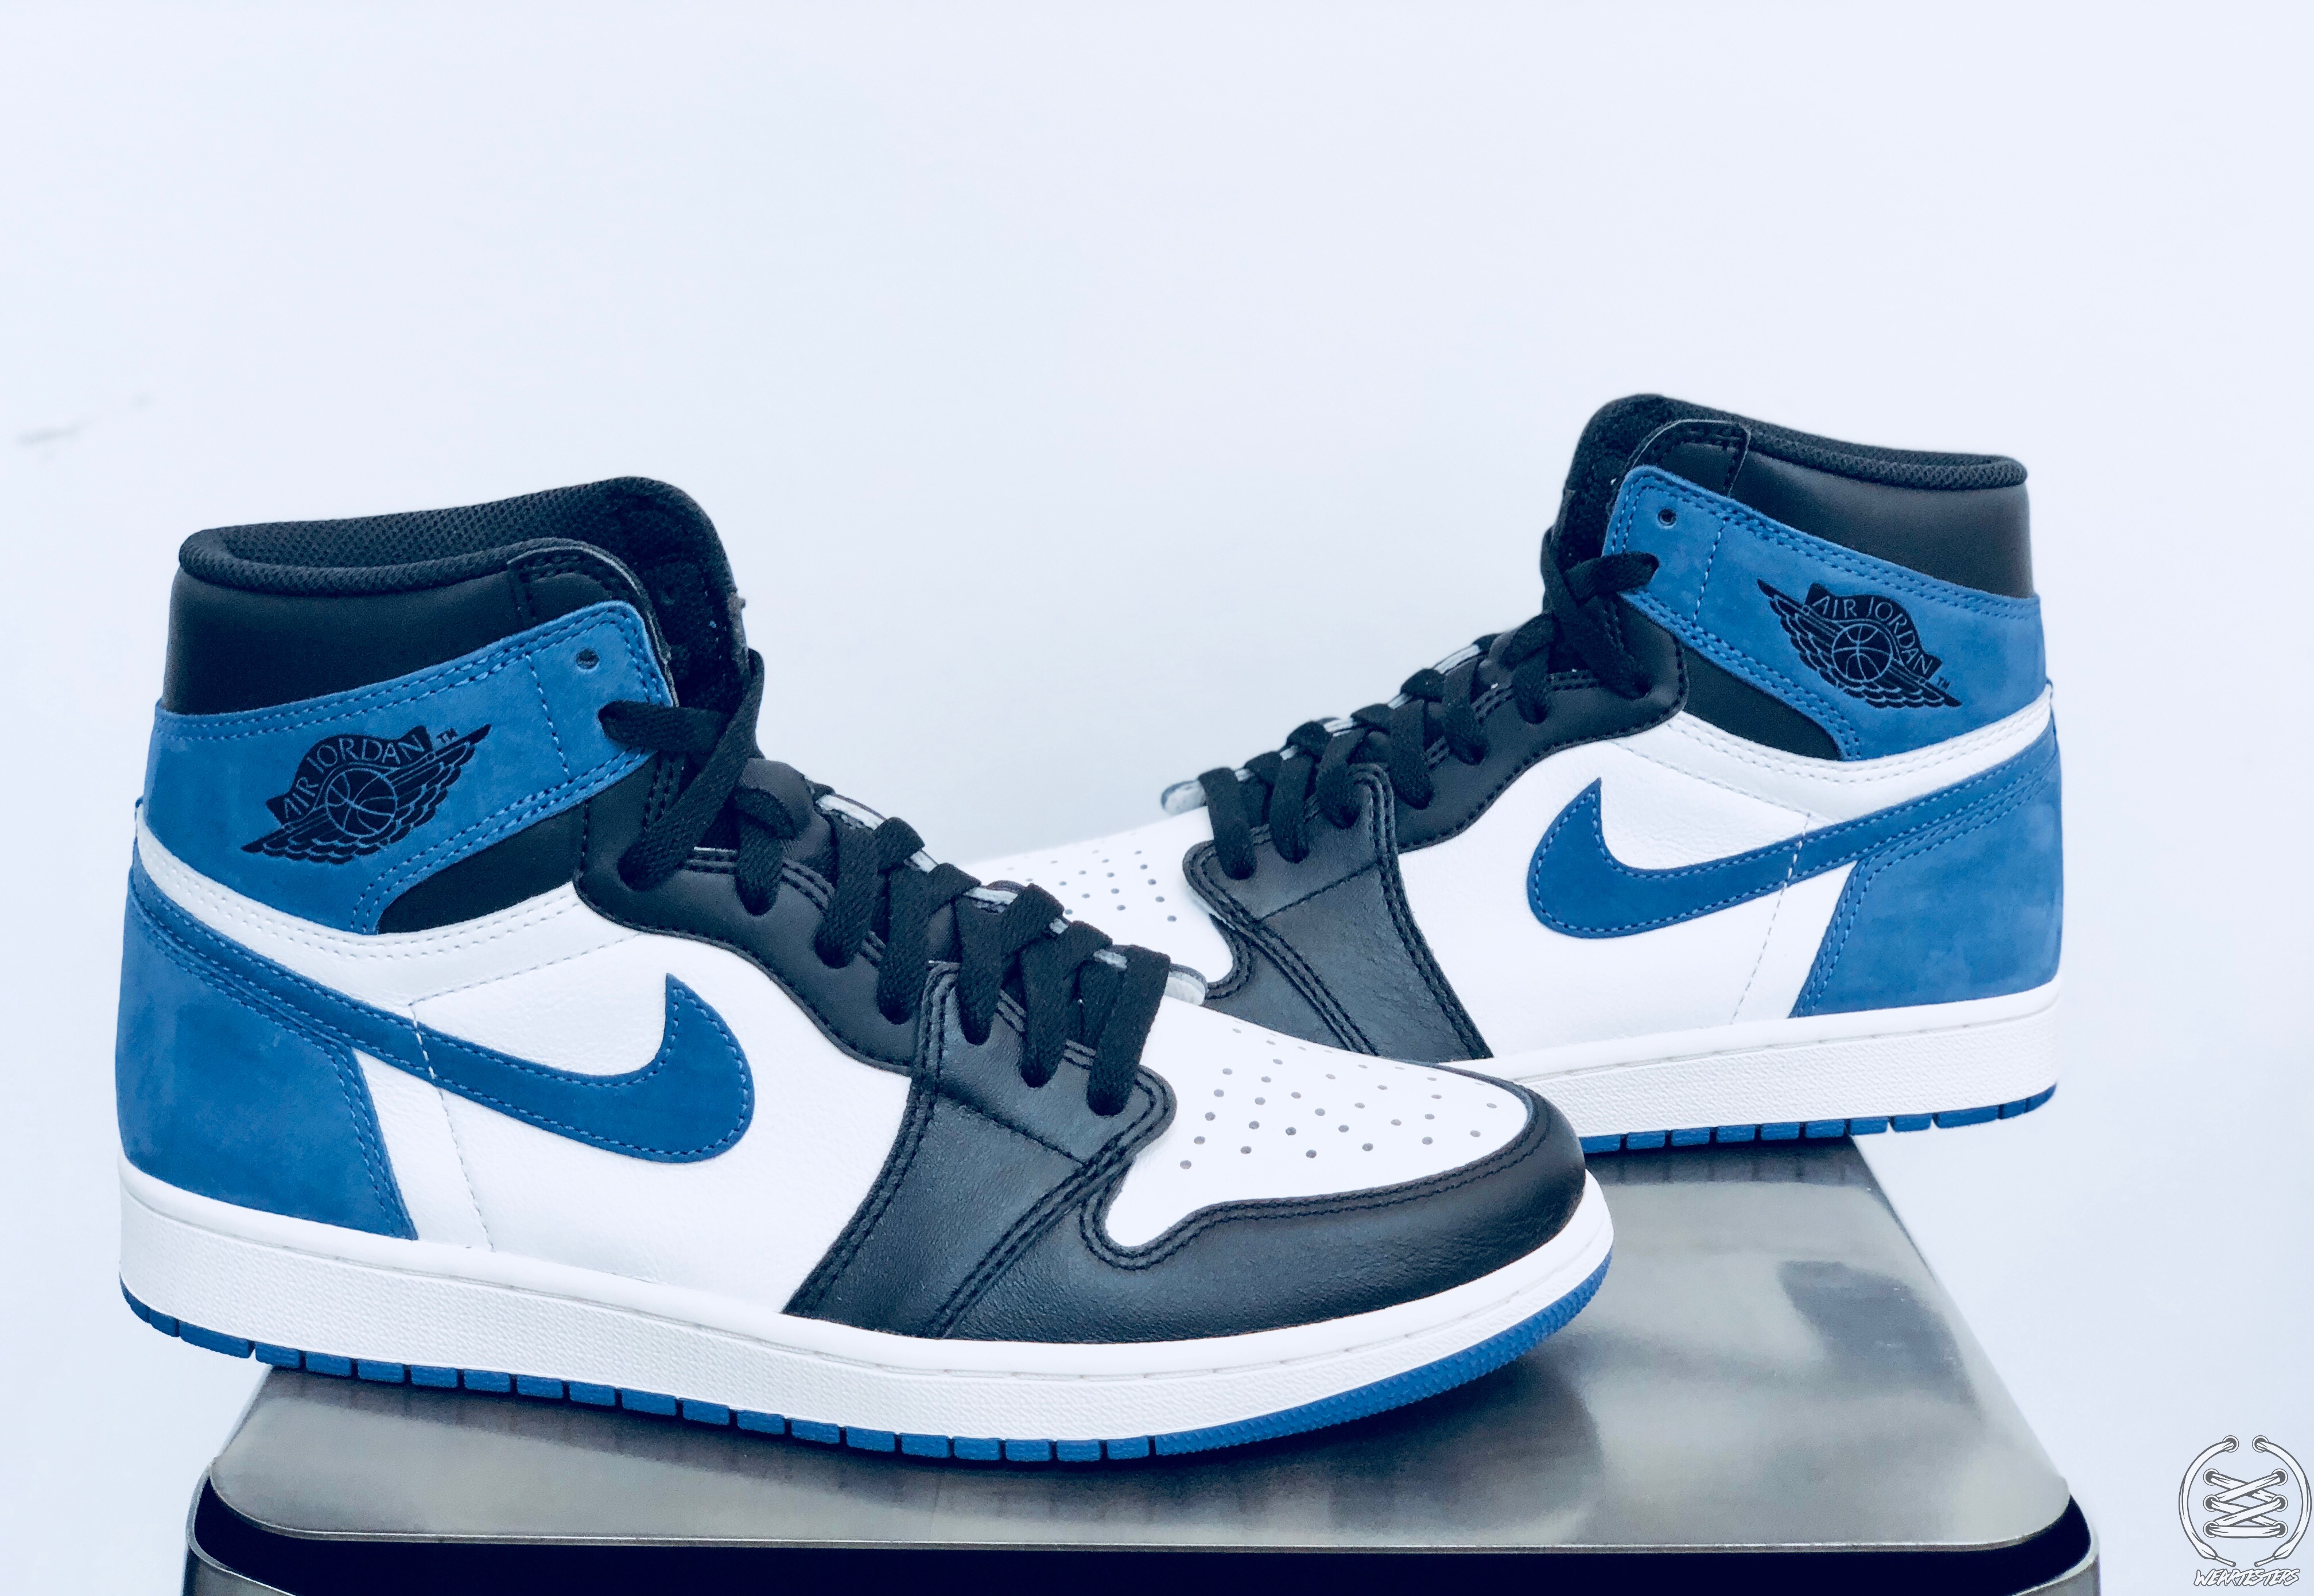 Four Air Jordan 1 Colorways Debut in the 'Best Hand in the Game ...